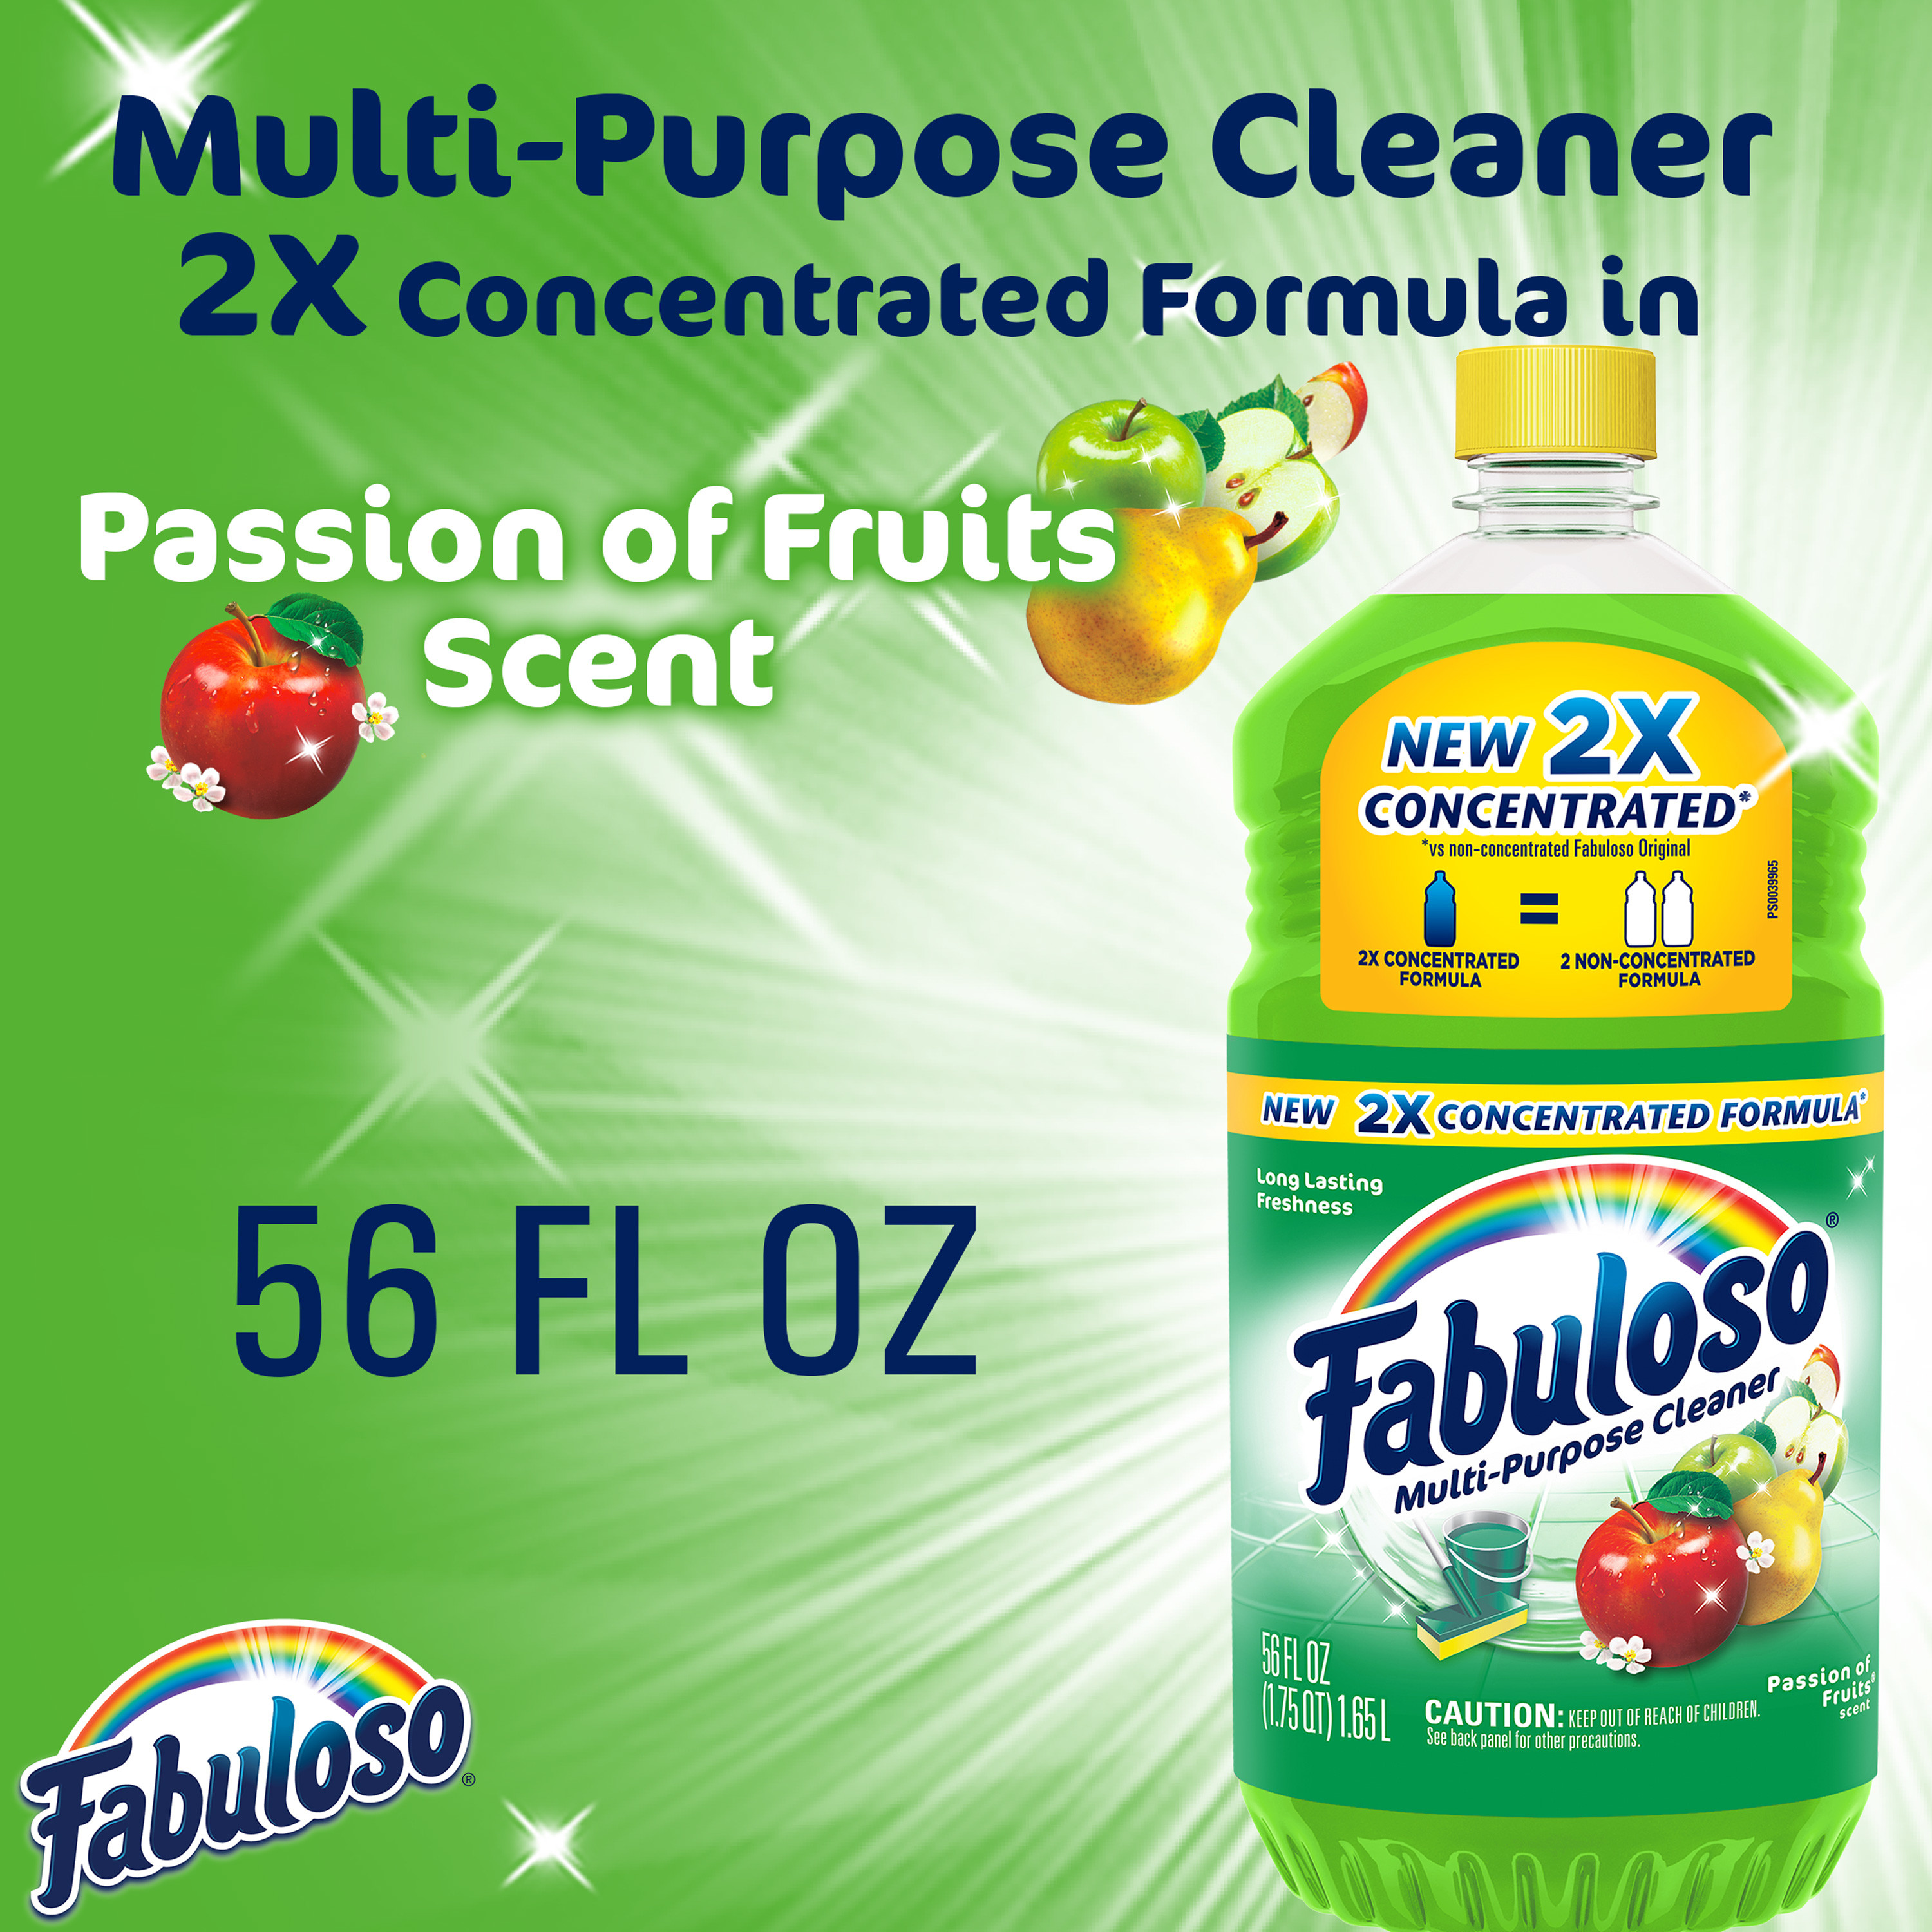 Fabuloso Multi-Purpose Cleaner, 2X Concentrated Formula, Passion of Fruits Scent, 56 oz - image 3 of 12